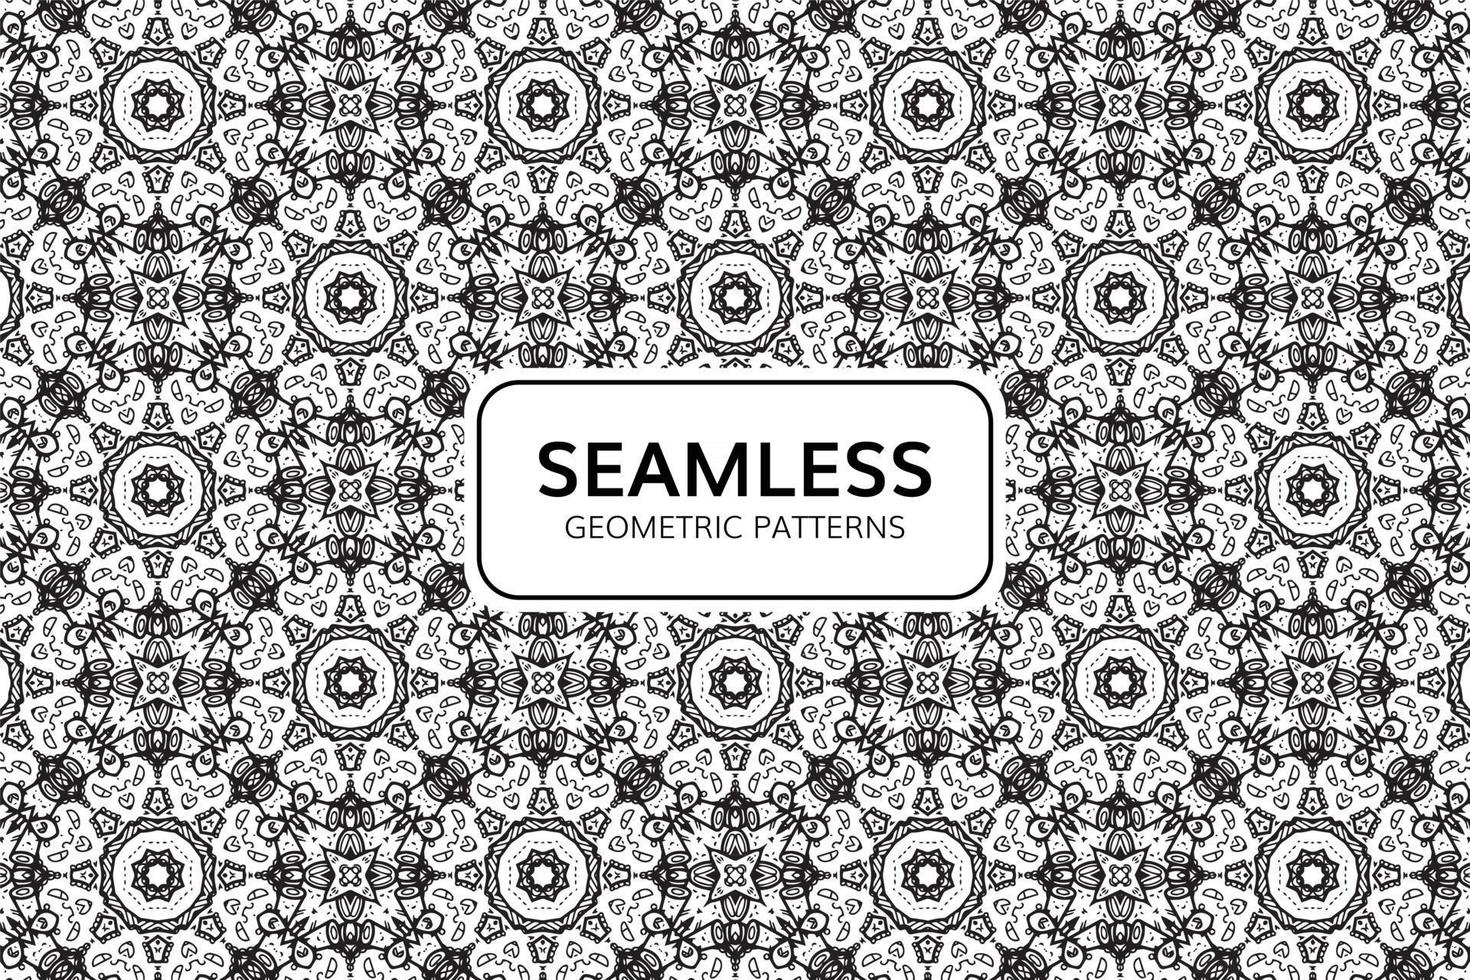 Abstract Geometric Seamless Pattern Background vector